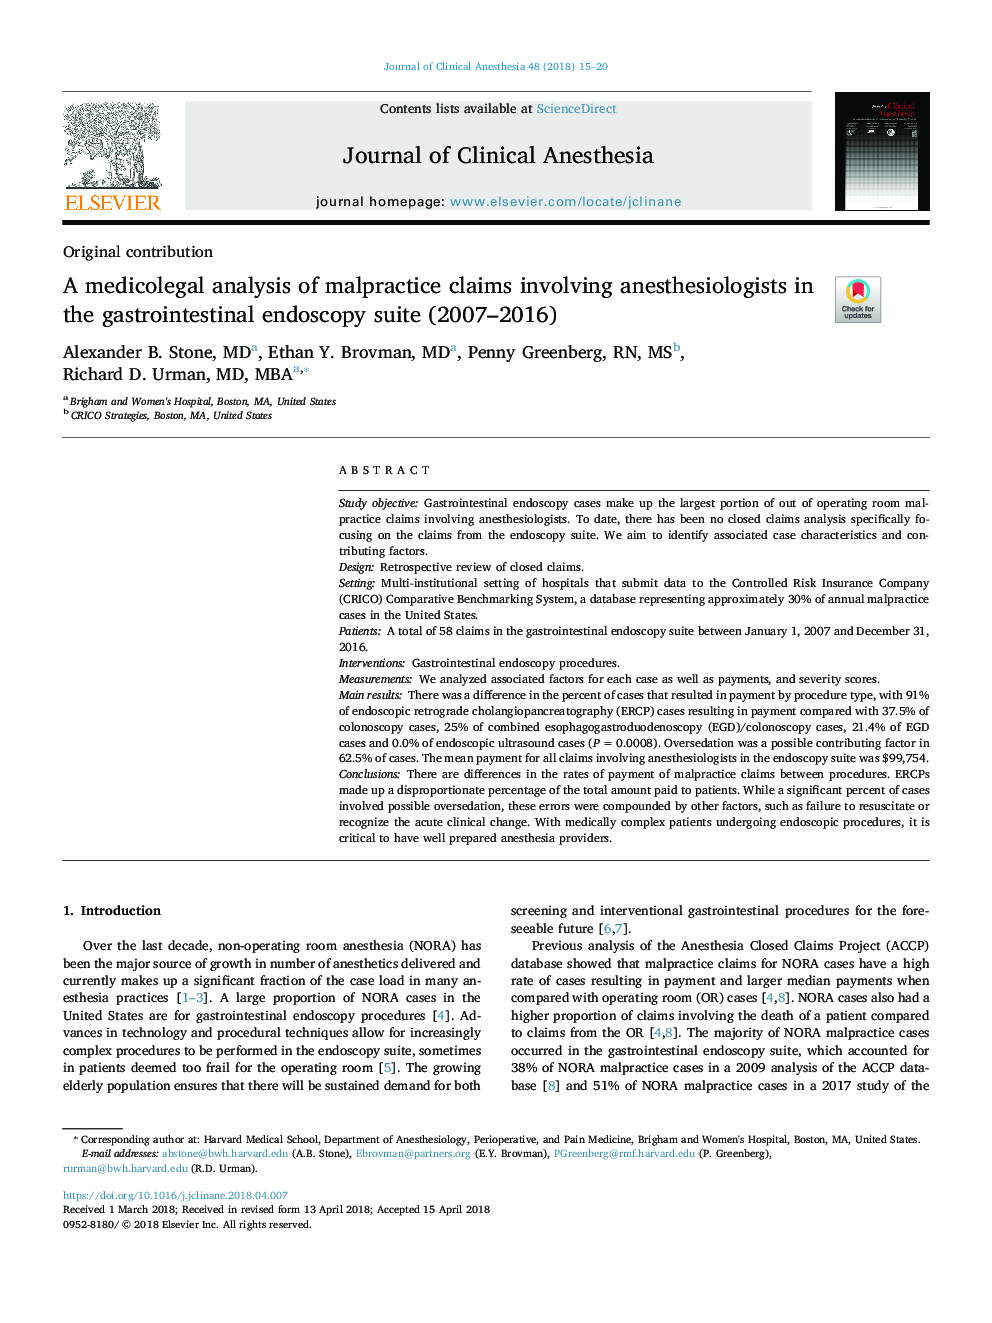 A medicolegal analysis of malpractice claims involving anesthesiologists in the gastrointestinal endoscopy suite (2007-2016)